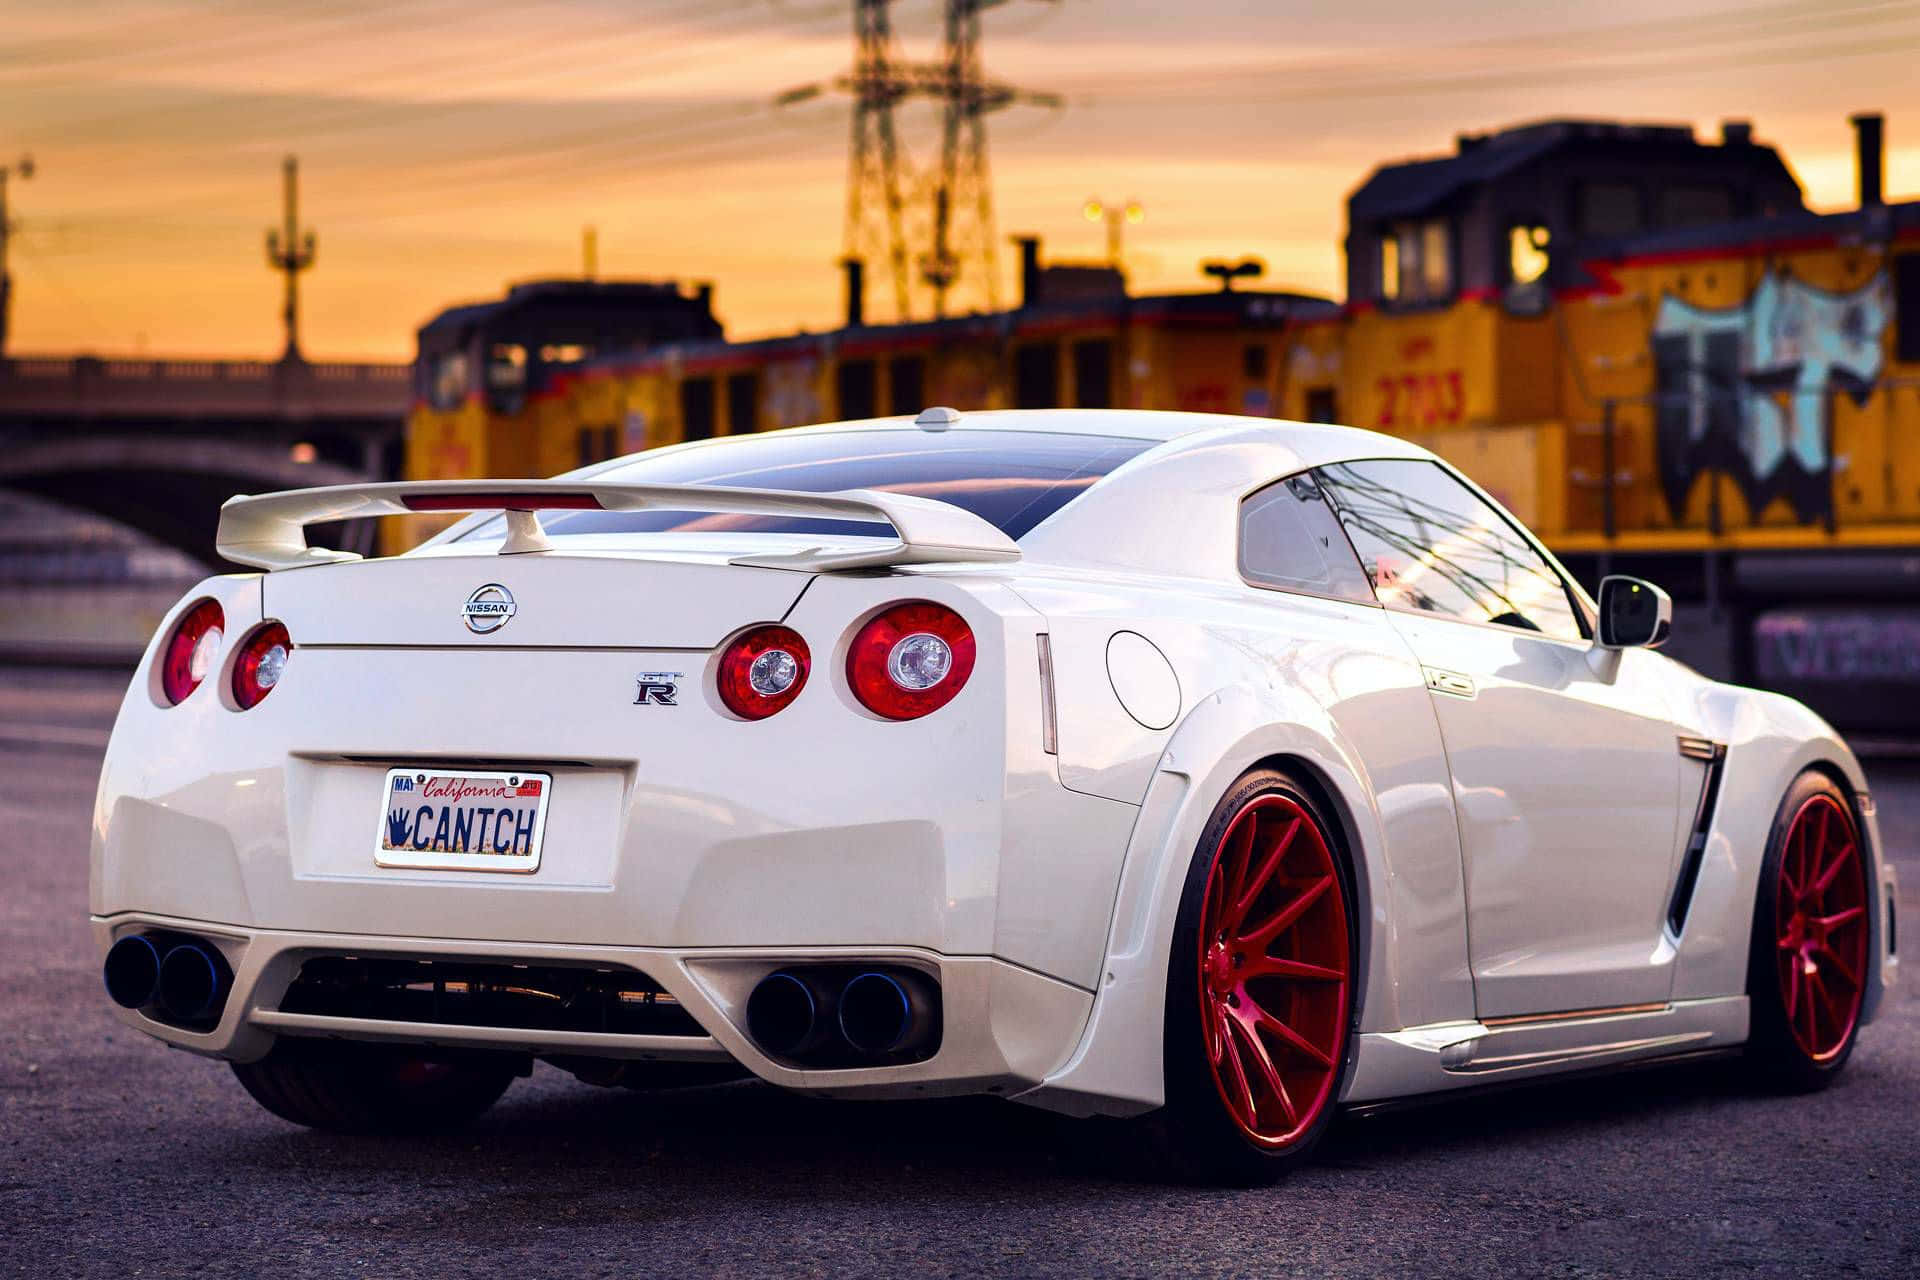 The King Of Cool - Gtr Super Car